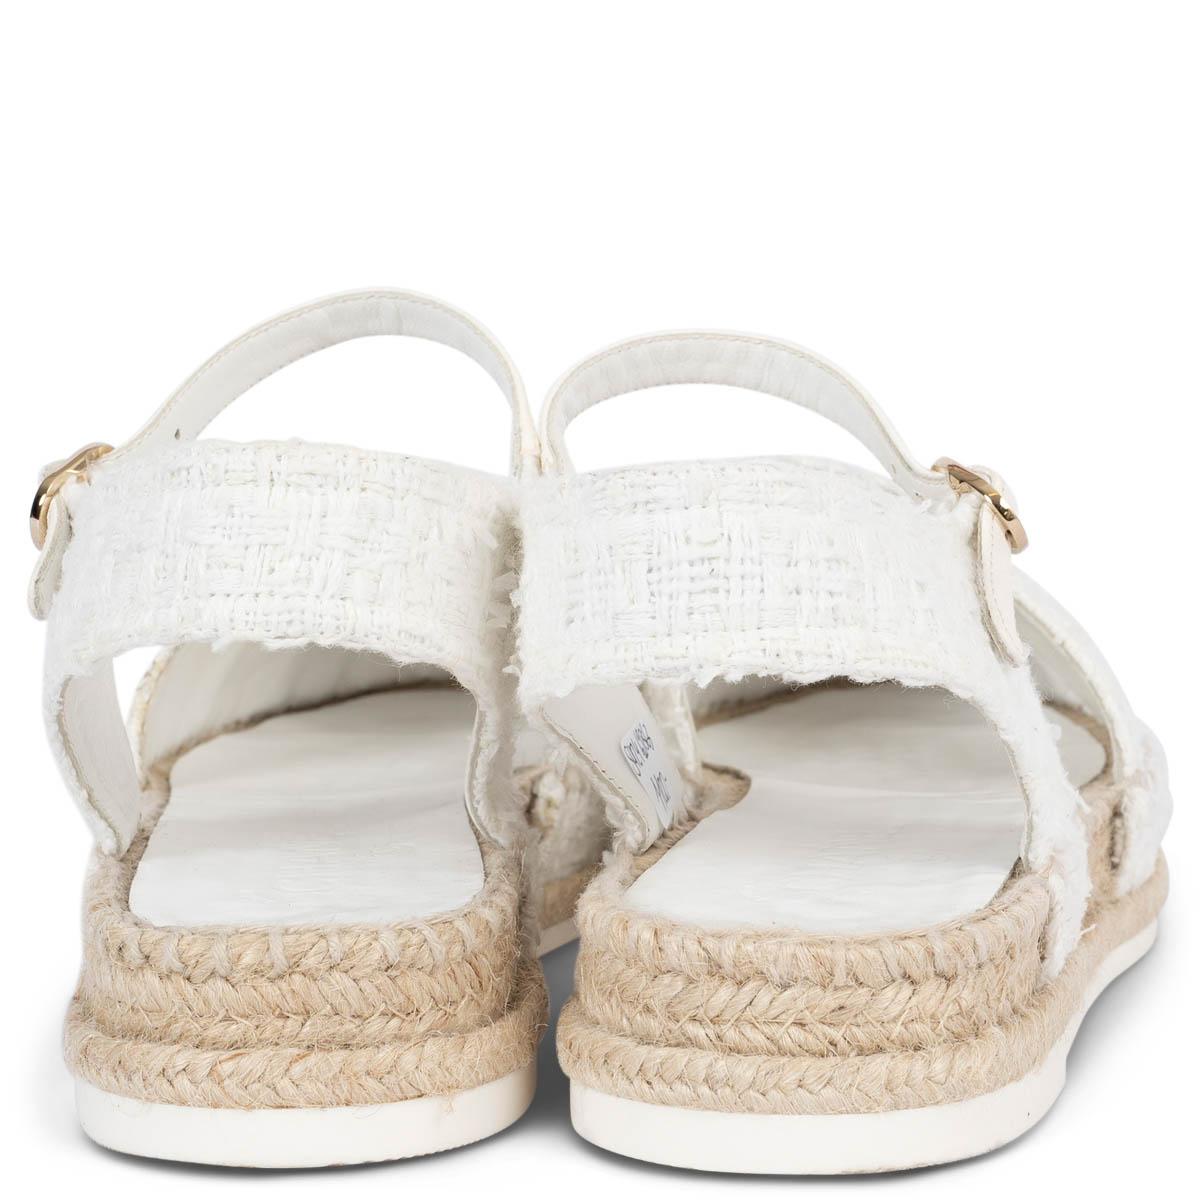 CHANEL white 2020 20P TWEED ESPADRILLES Shoes 39 For Sale 1